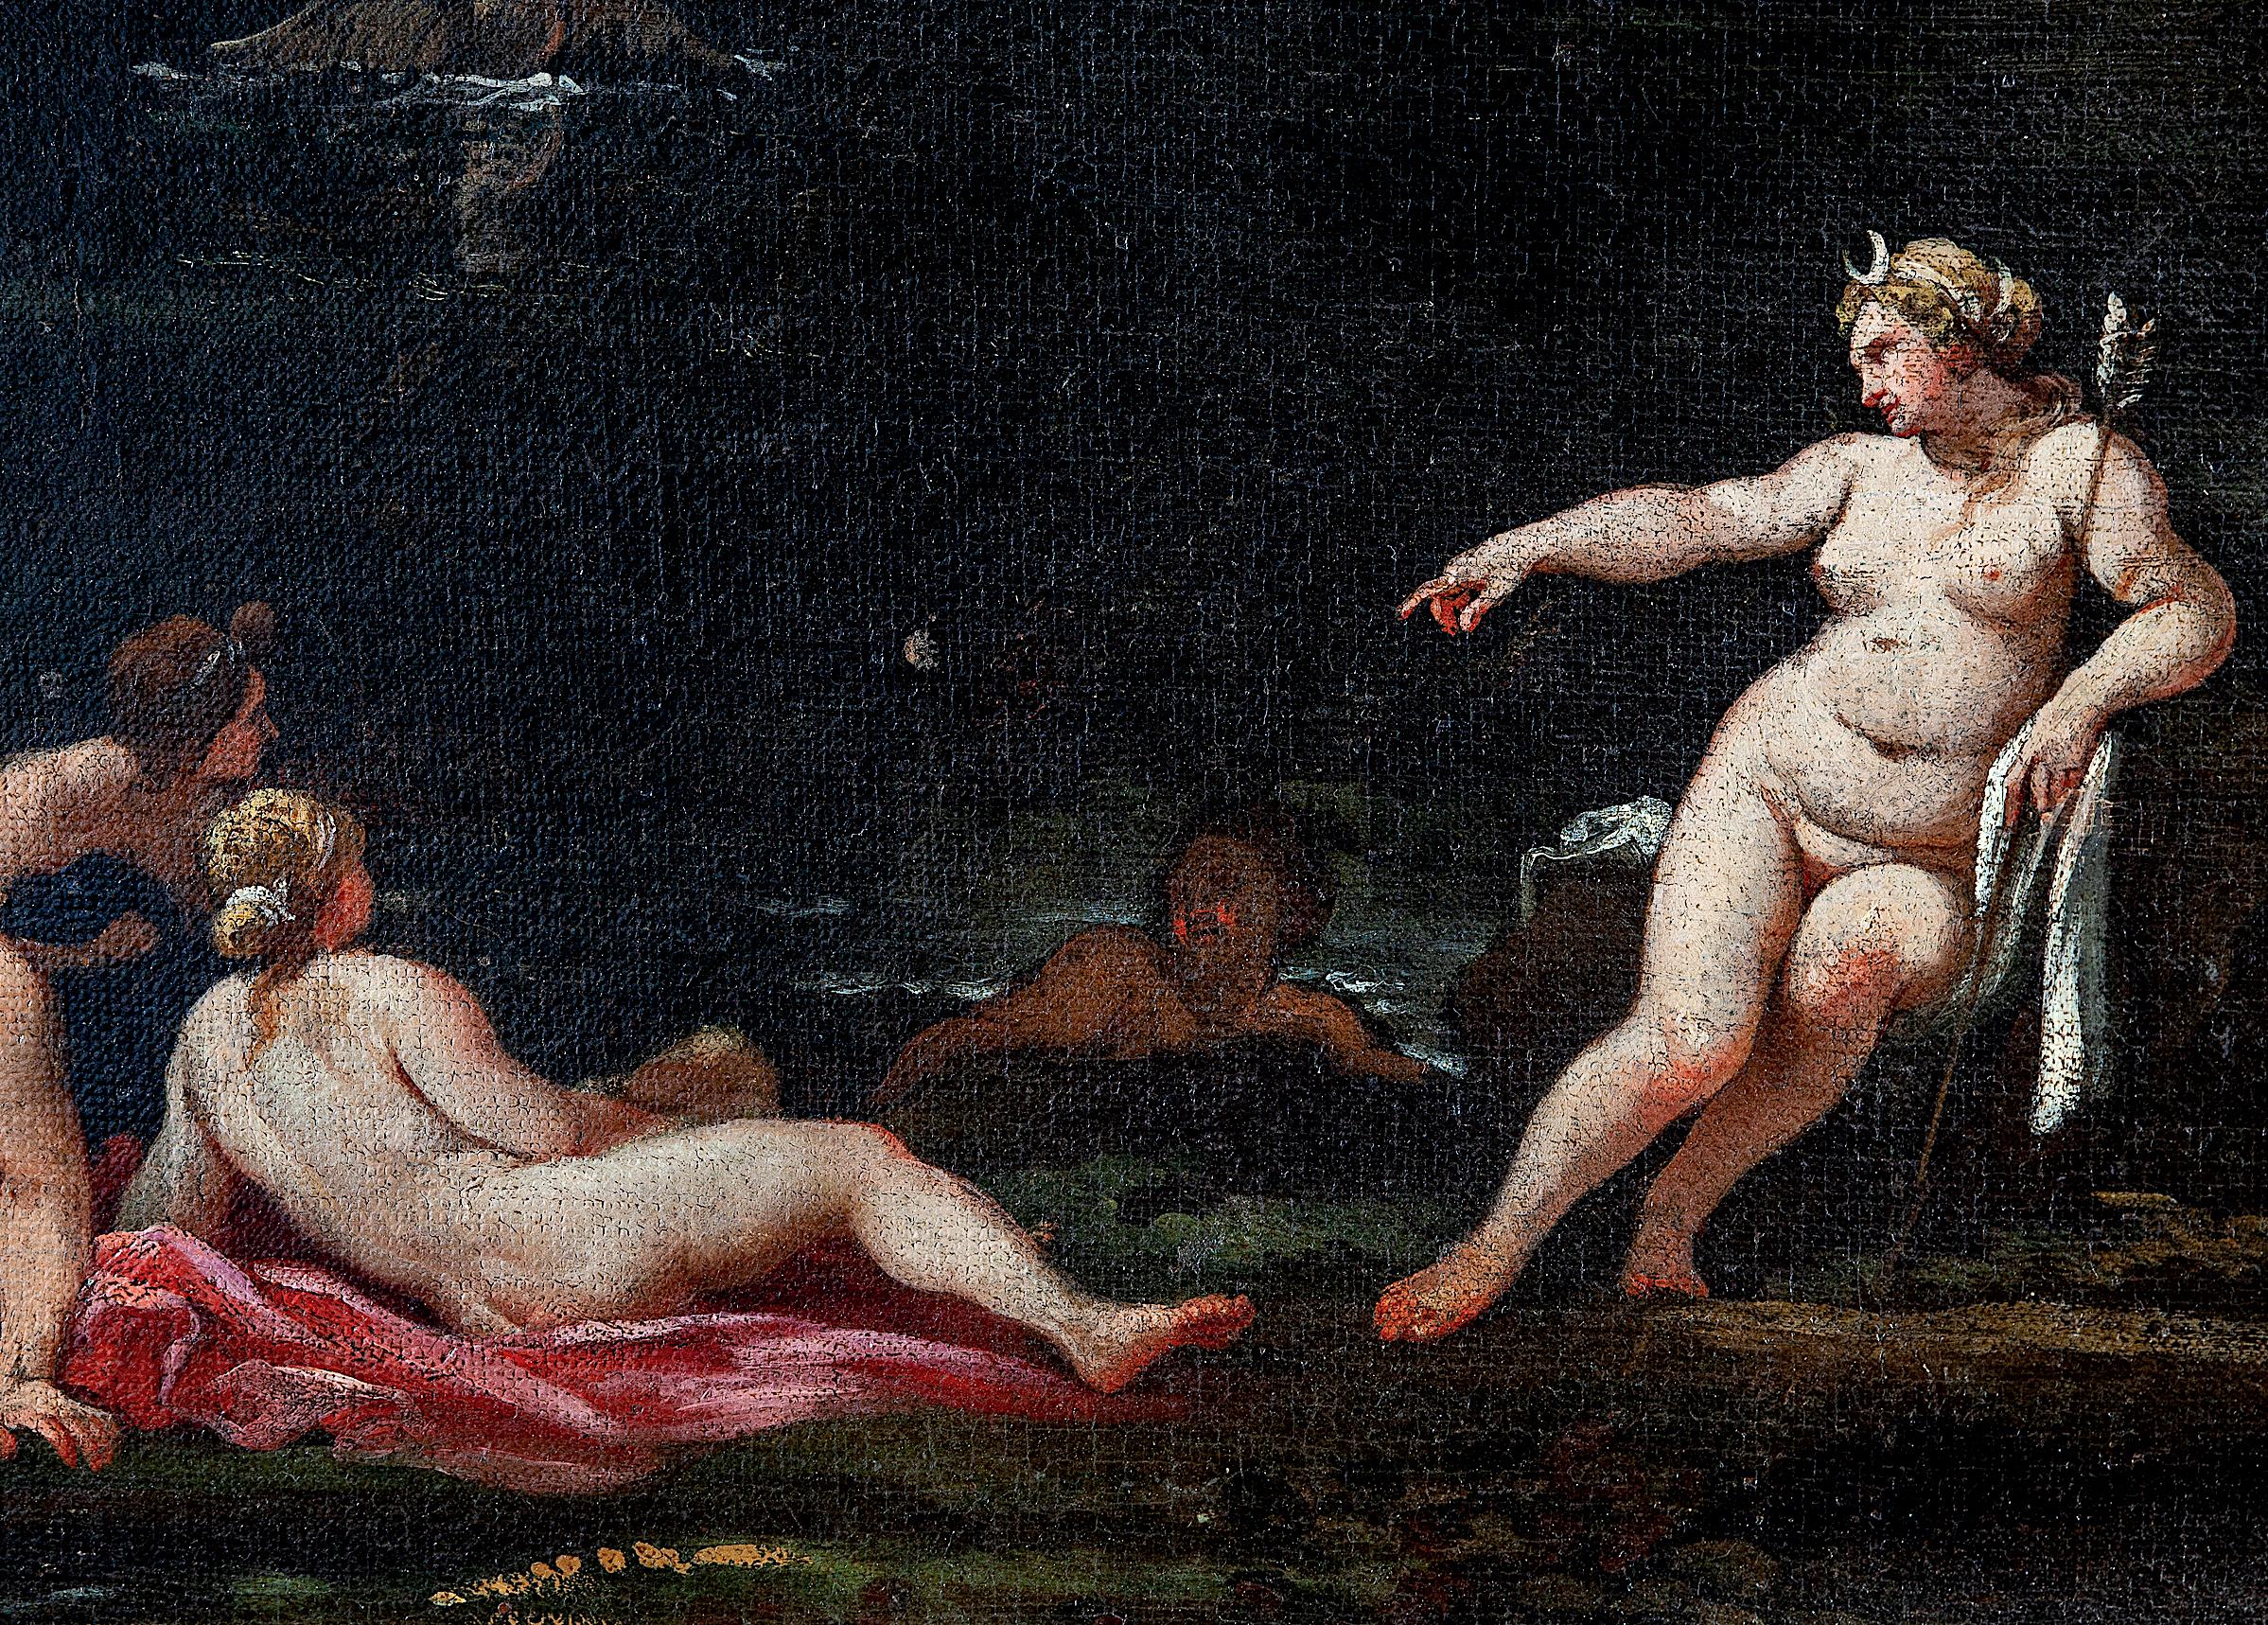 Important 17' Century Mythological Painting Diana and Actaeon Oil on Canvas  - Black Landscape Painting by Giovan Battista Viola